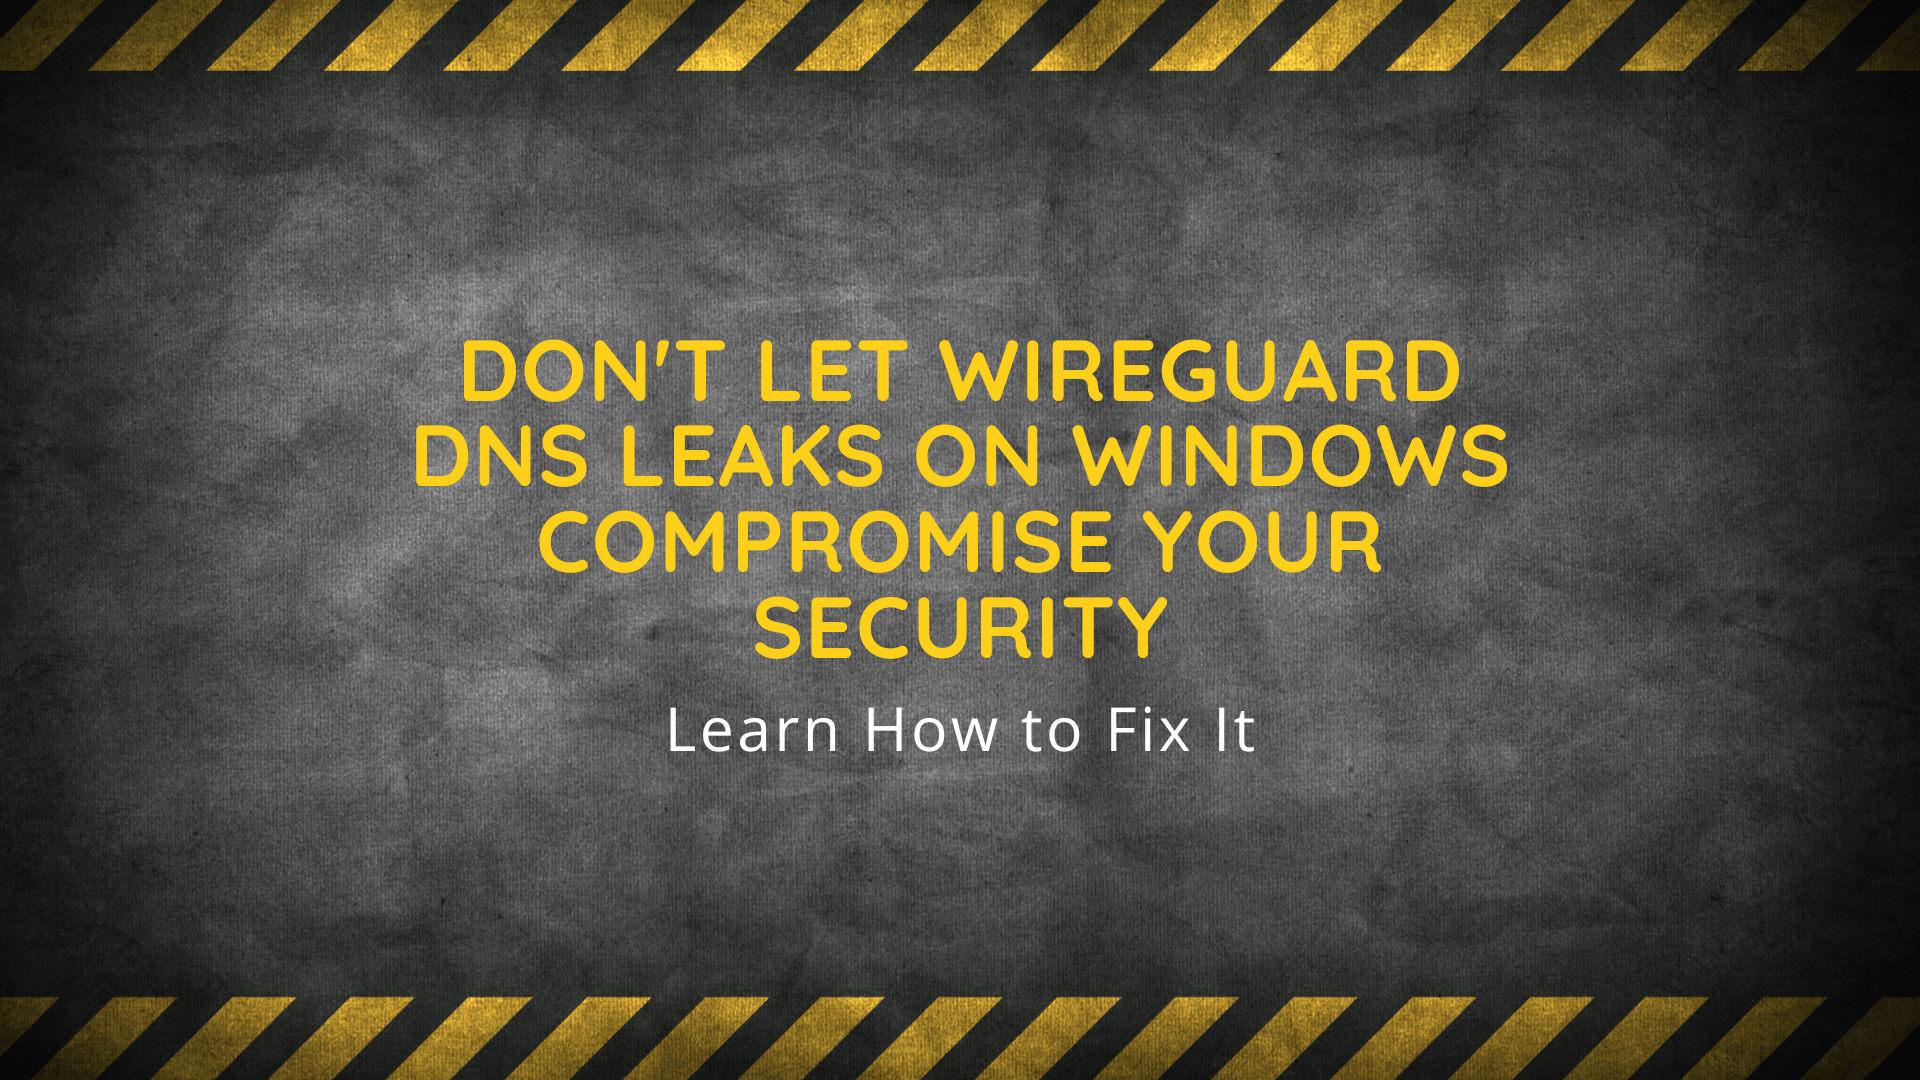 Don't Let WireGuard DNS Leaks on Windows Compromise Your Security: Learn How to Fix It